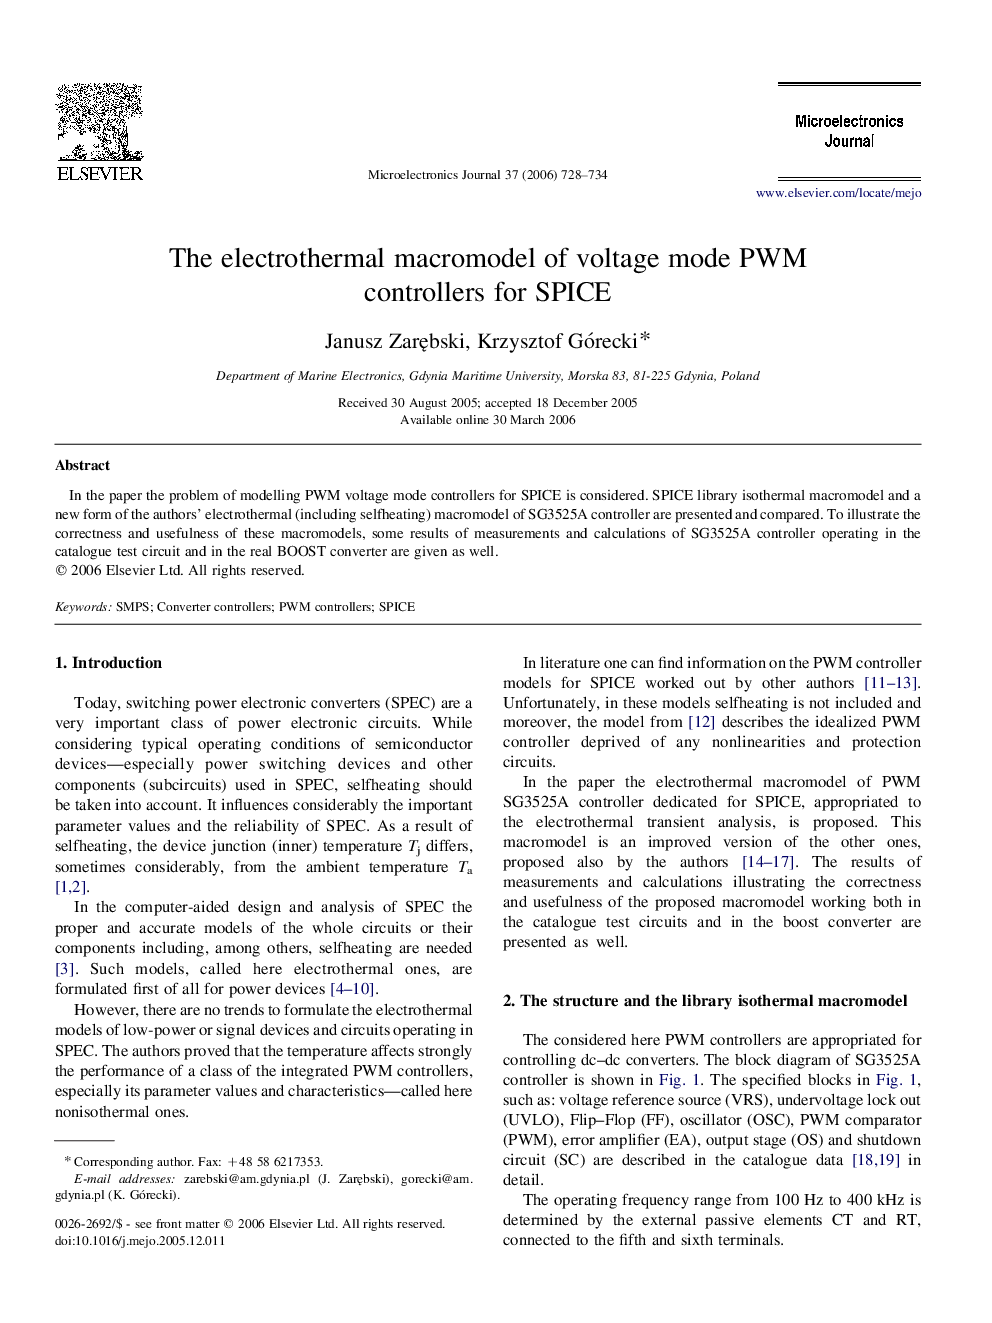 The electrothermal macromodel of voltage mode PWM controllers for SPICE